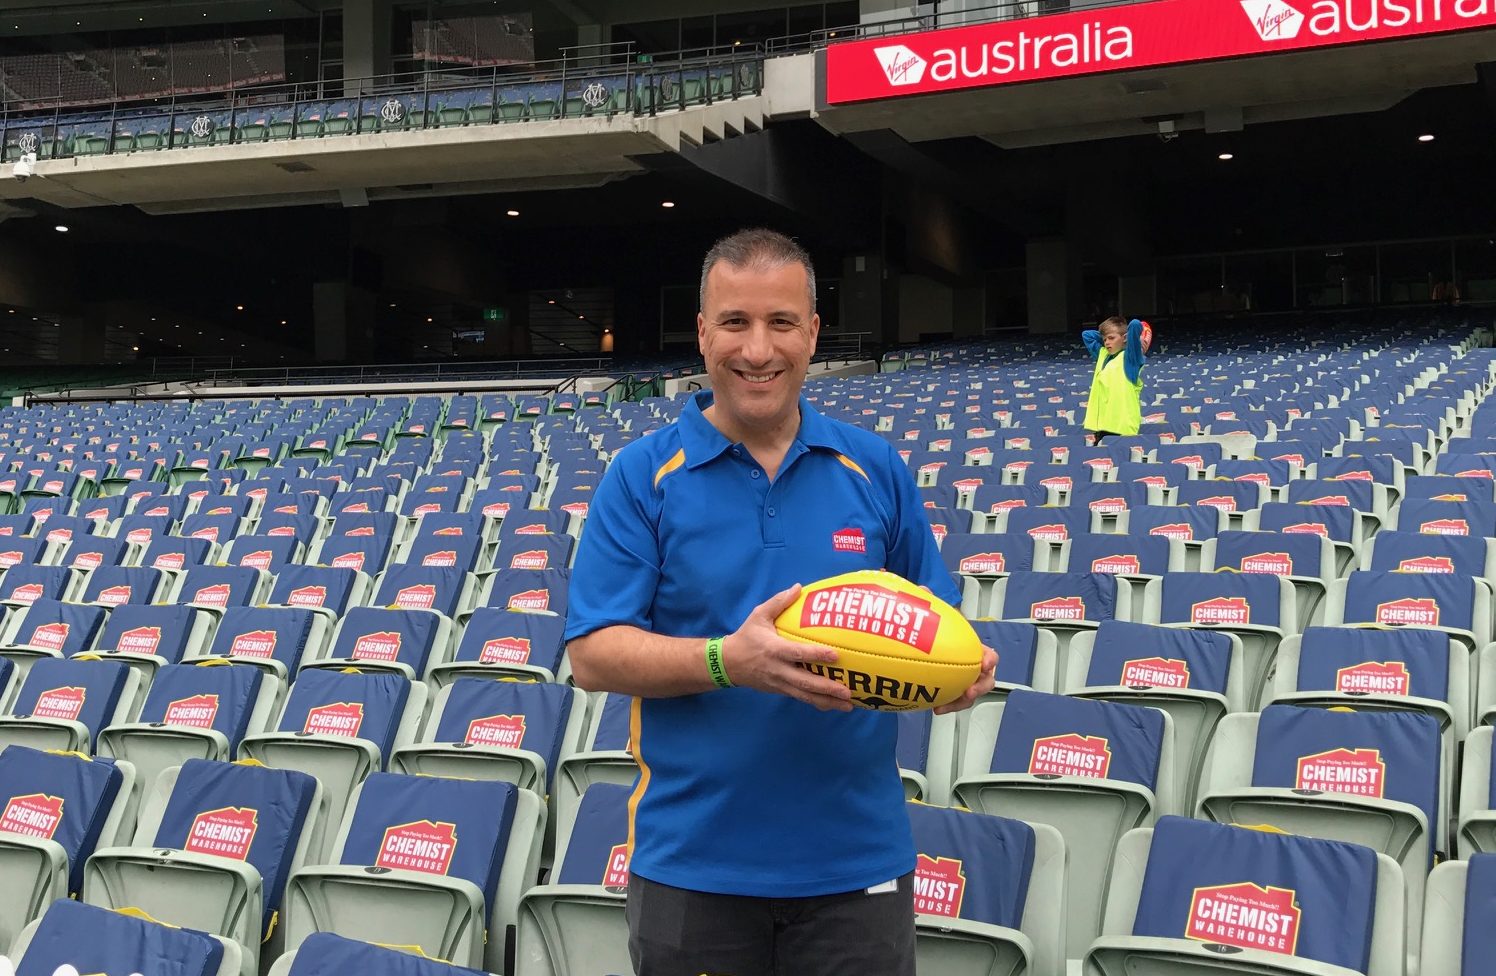 Chemist Warehouse COO Mario Tascone at the MCG for the 2017 AFL Grand Final.